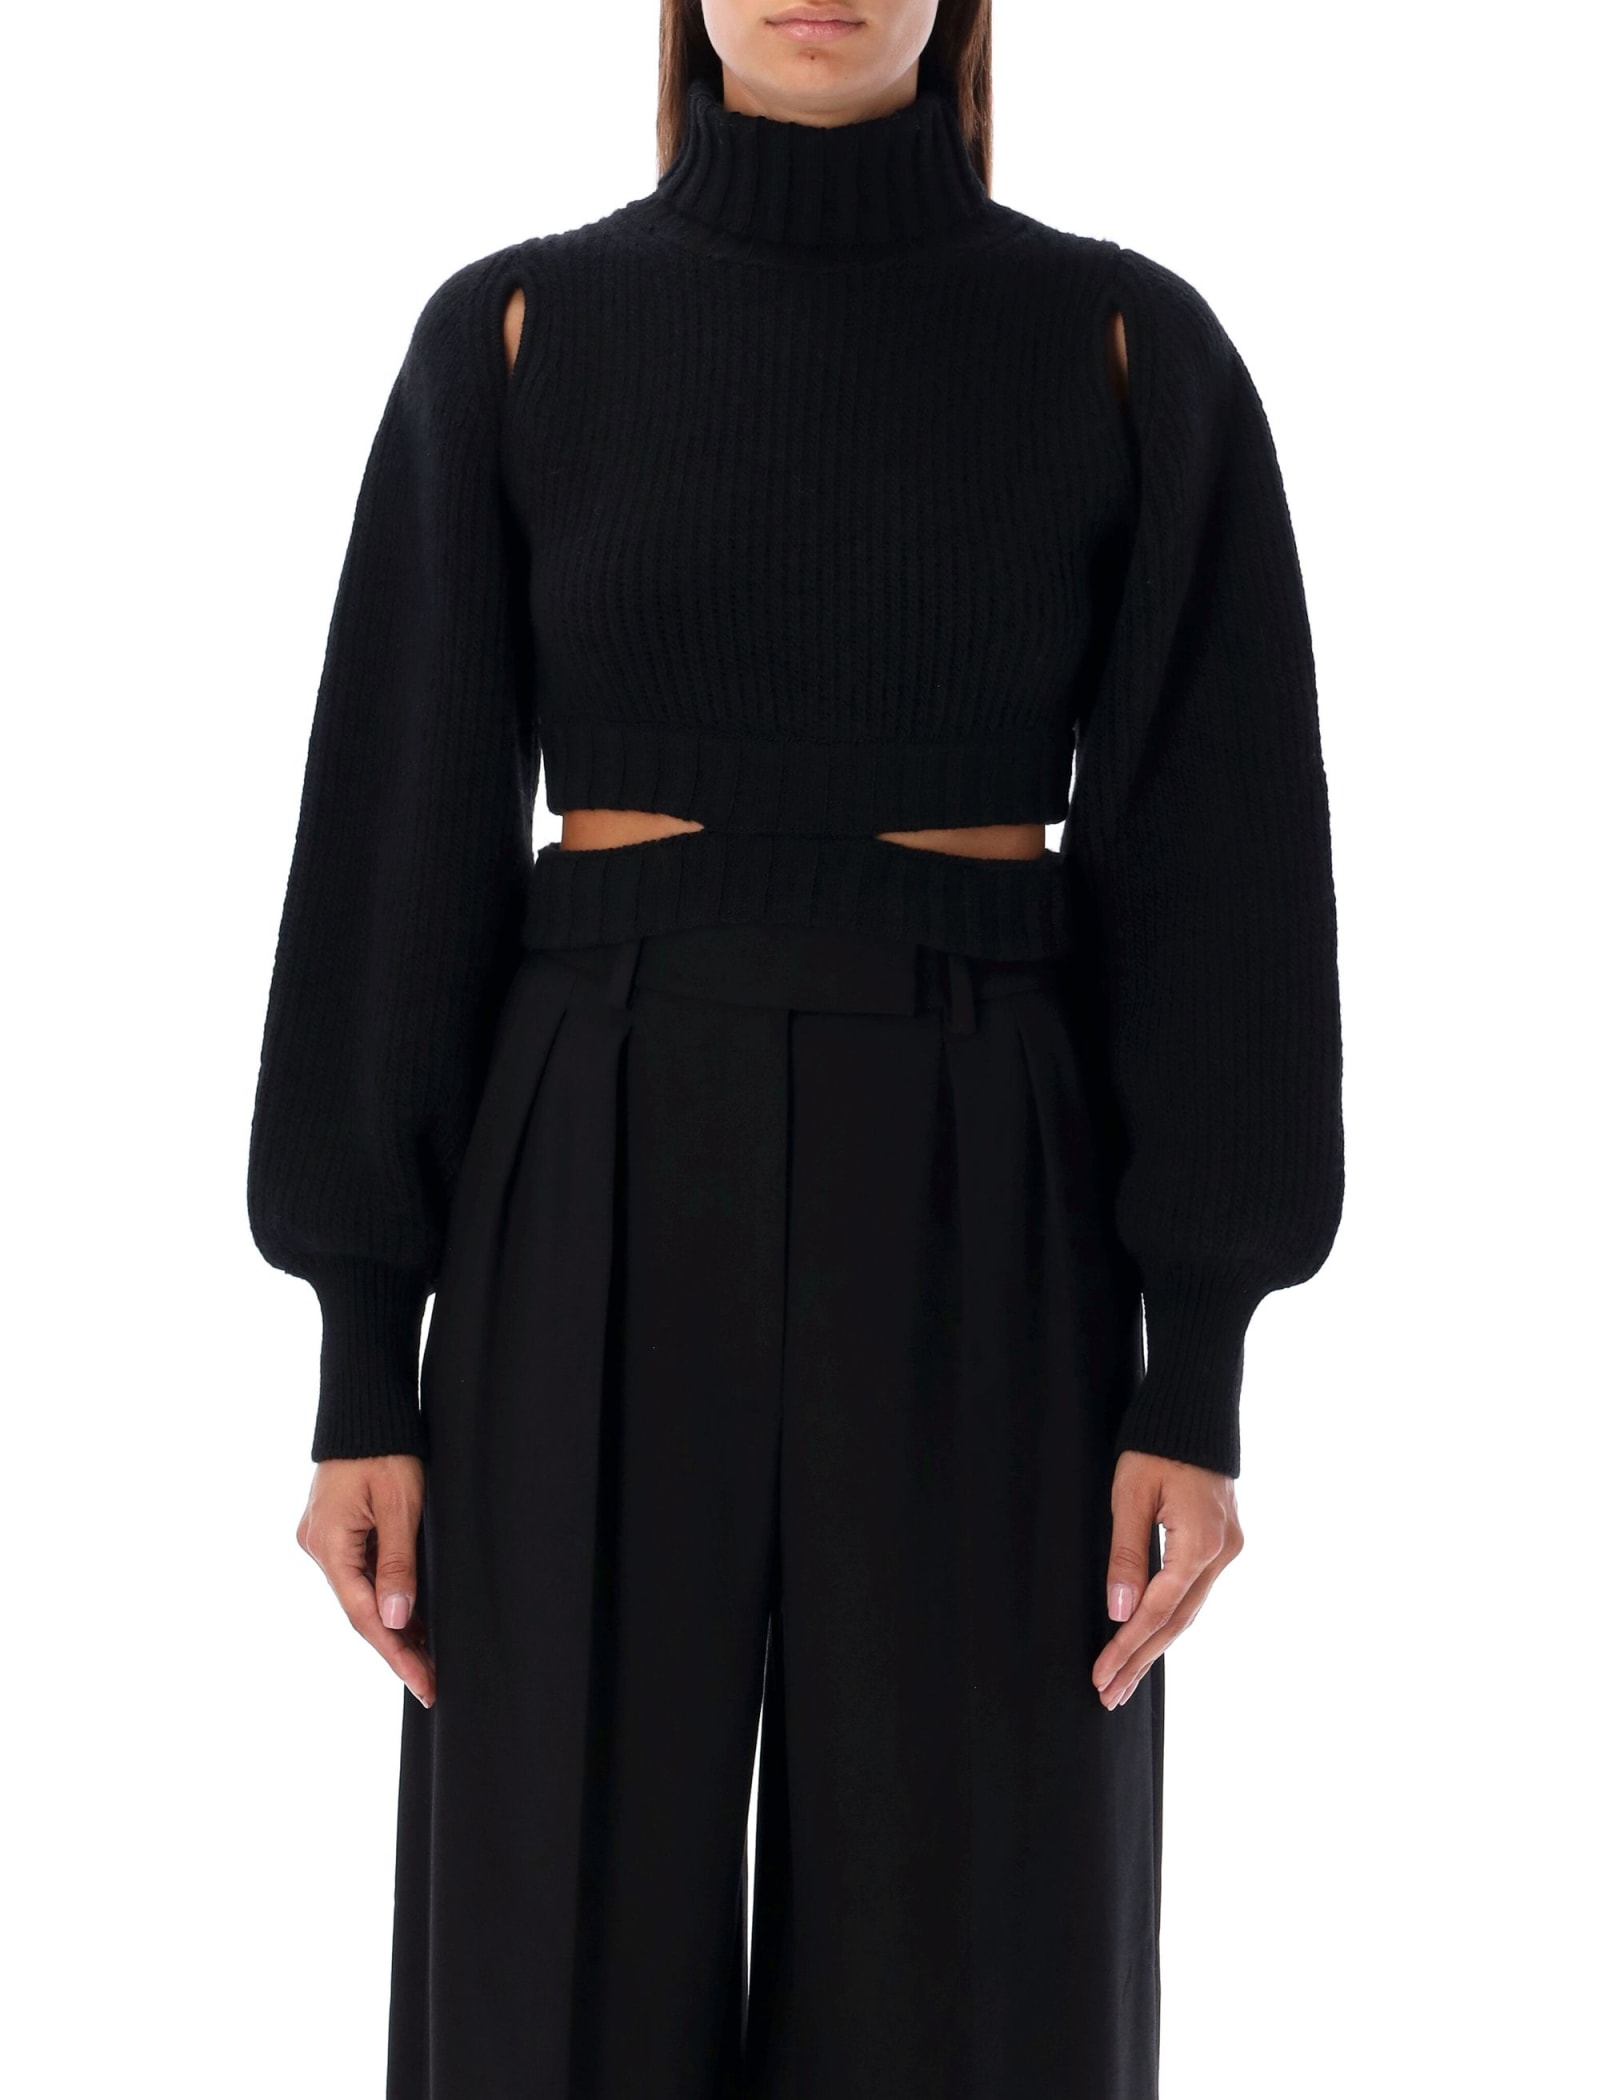 ANDREĀDAMO Cropped Knit Sweater